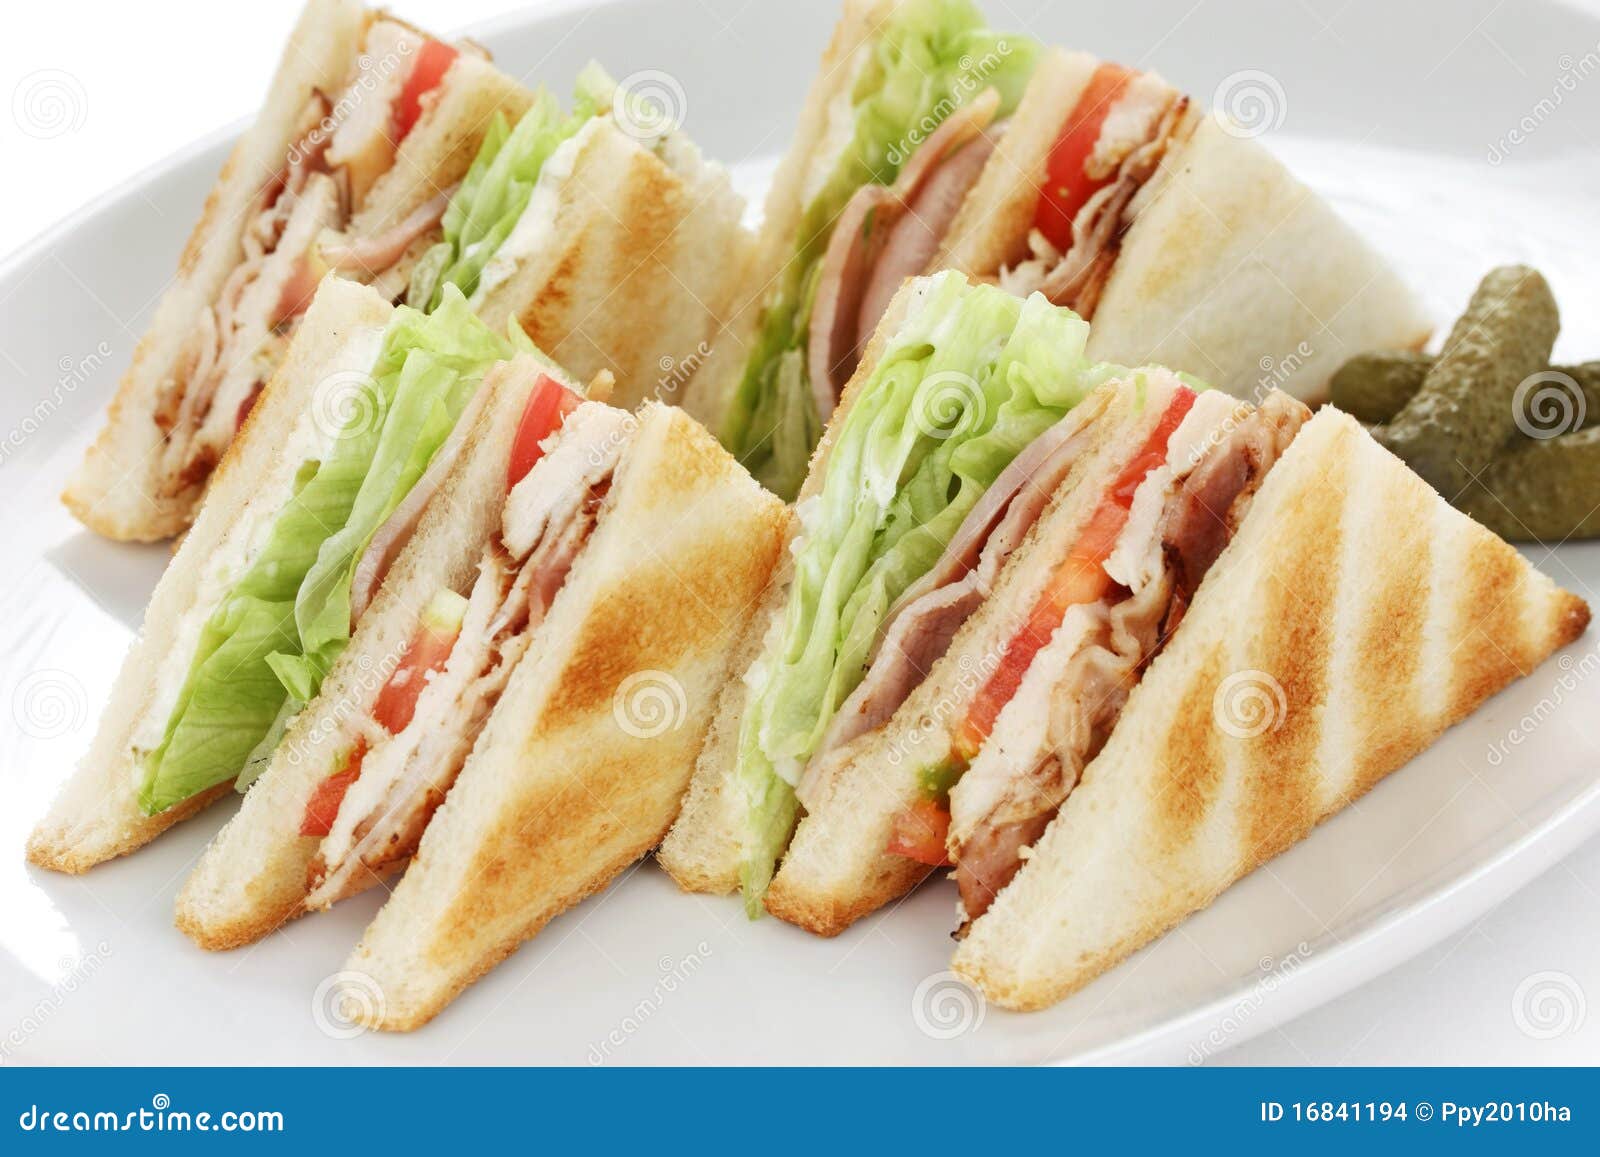 Club Sandwich Clubhouse Sandwich Stock Photo Image Of Lunch Chicken 16841194